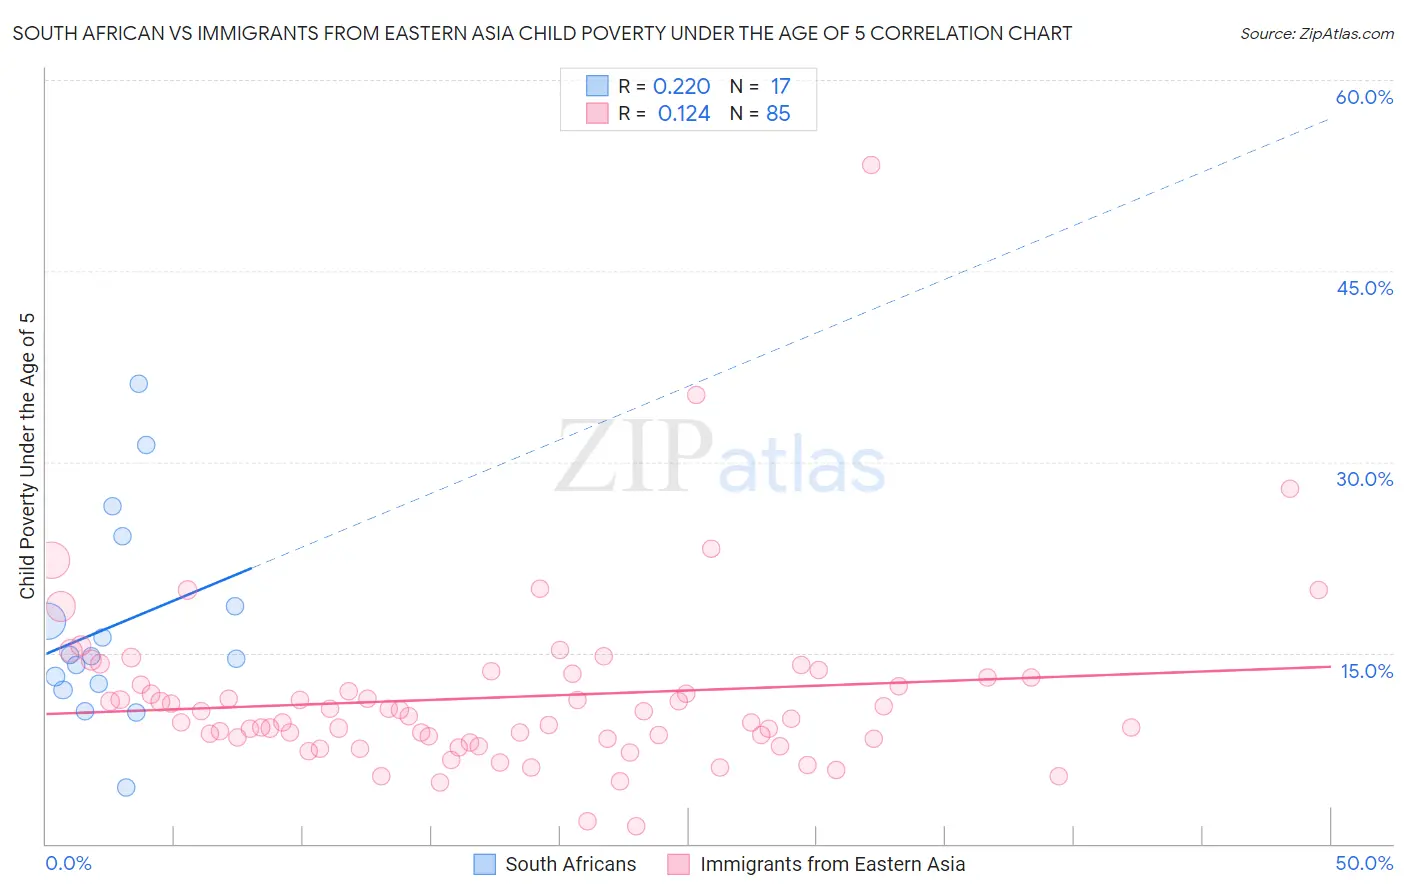 South African vs Immigrants from Eastern Asia Child Poverty Under the Age of 5